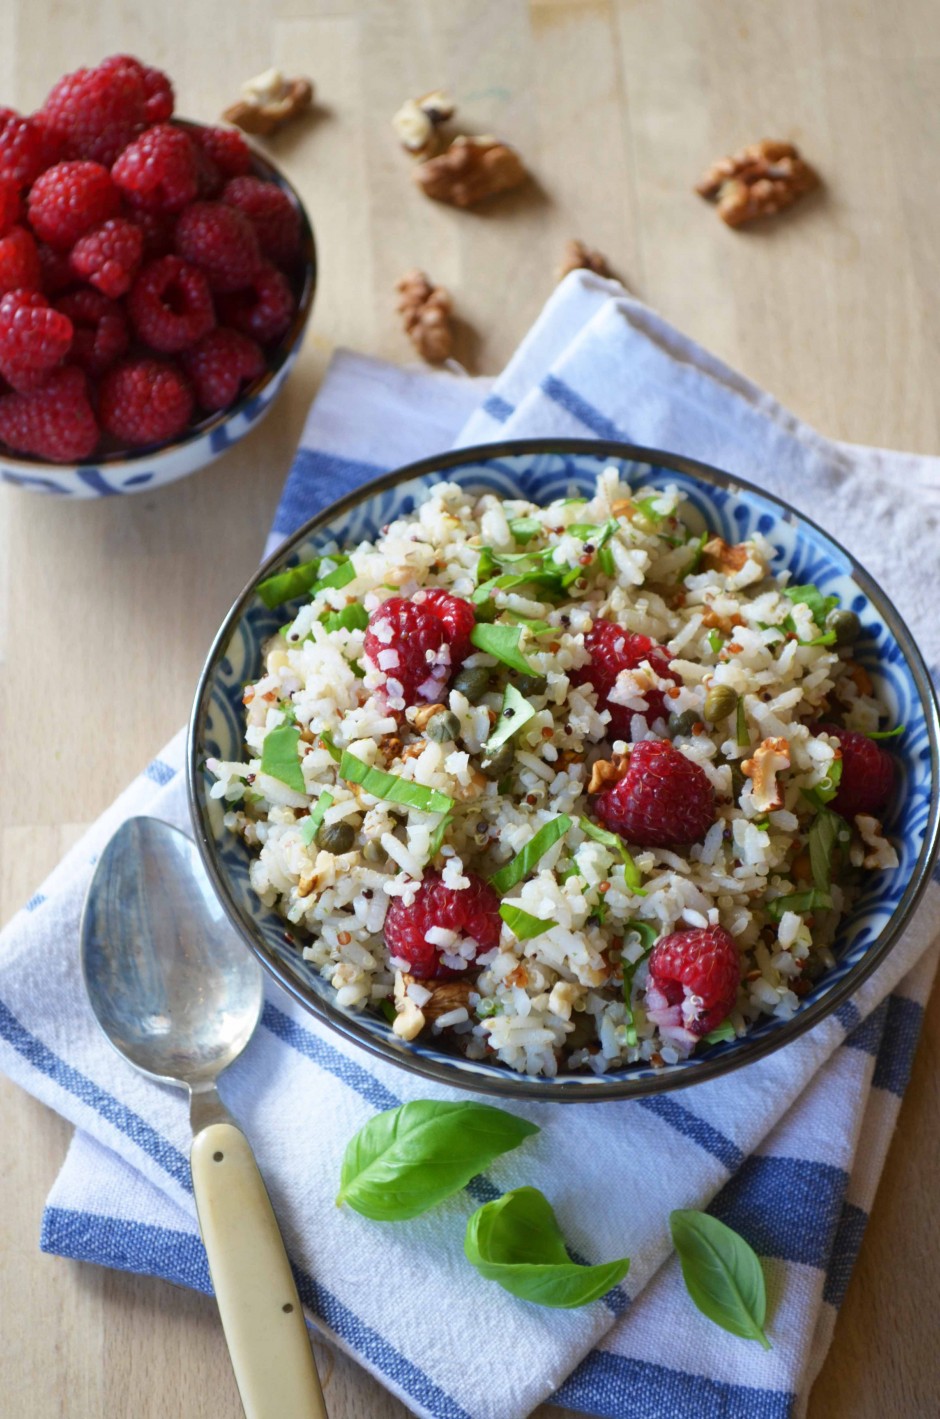 Bowl of grain salad with raspbberries, basil and walnuts. Recipe and photo by That Healthy Kitchen